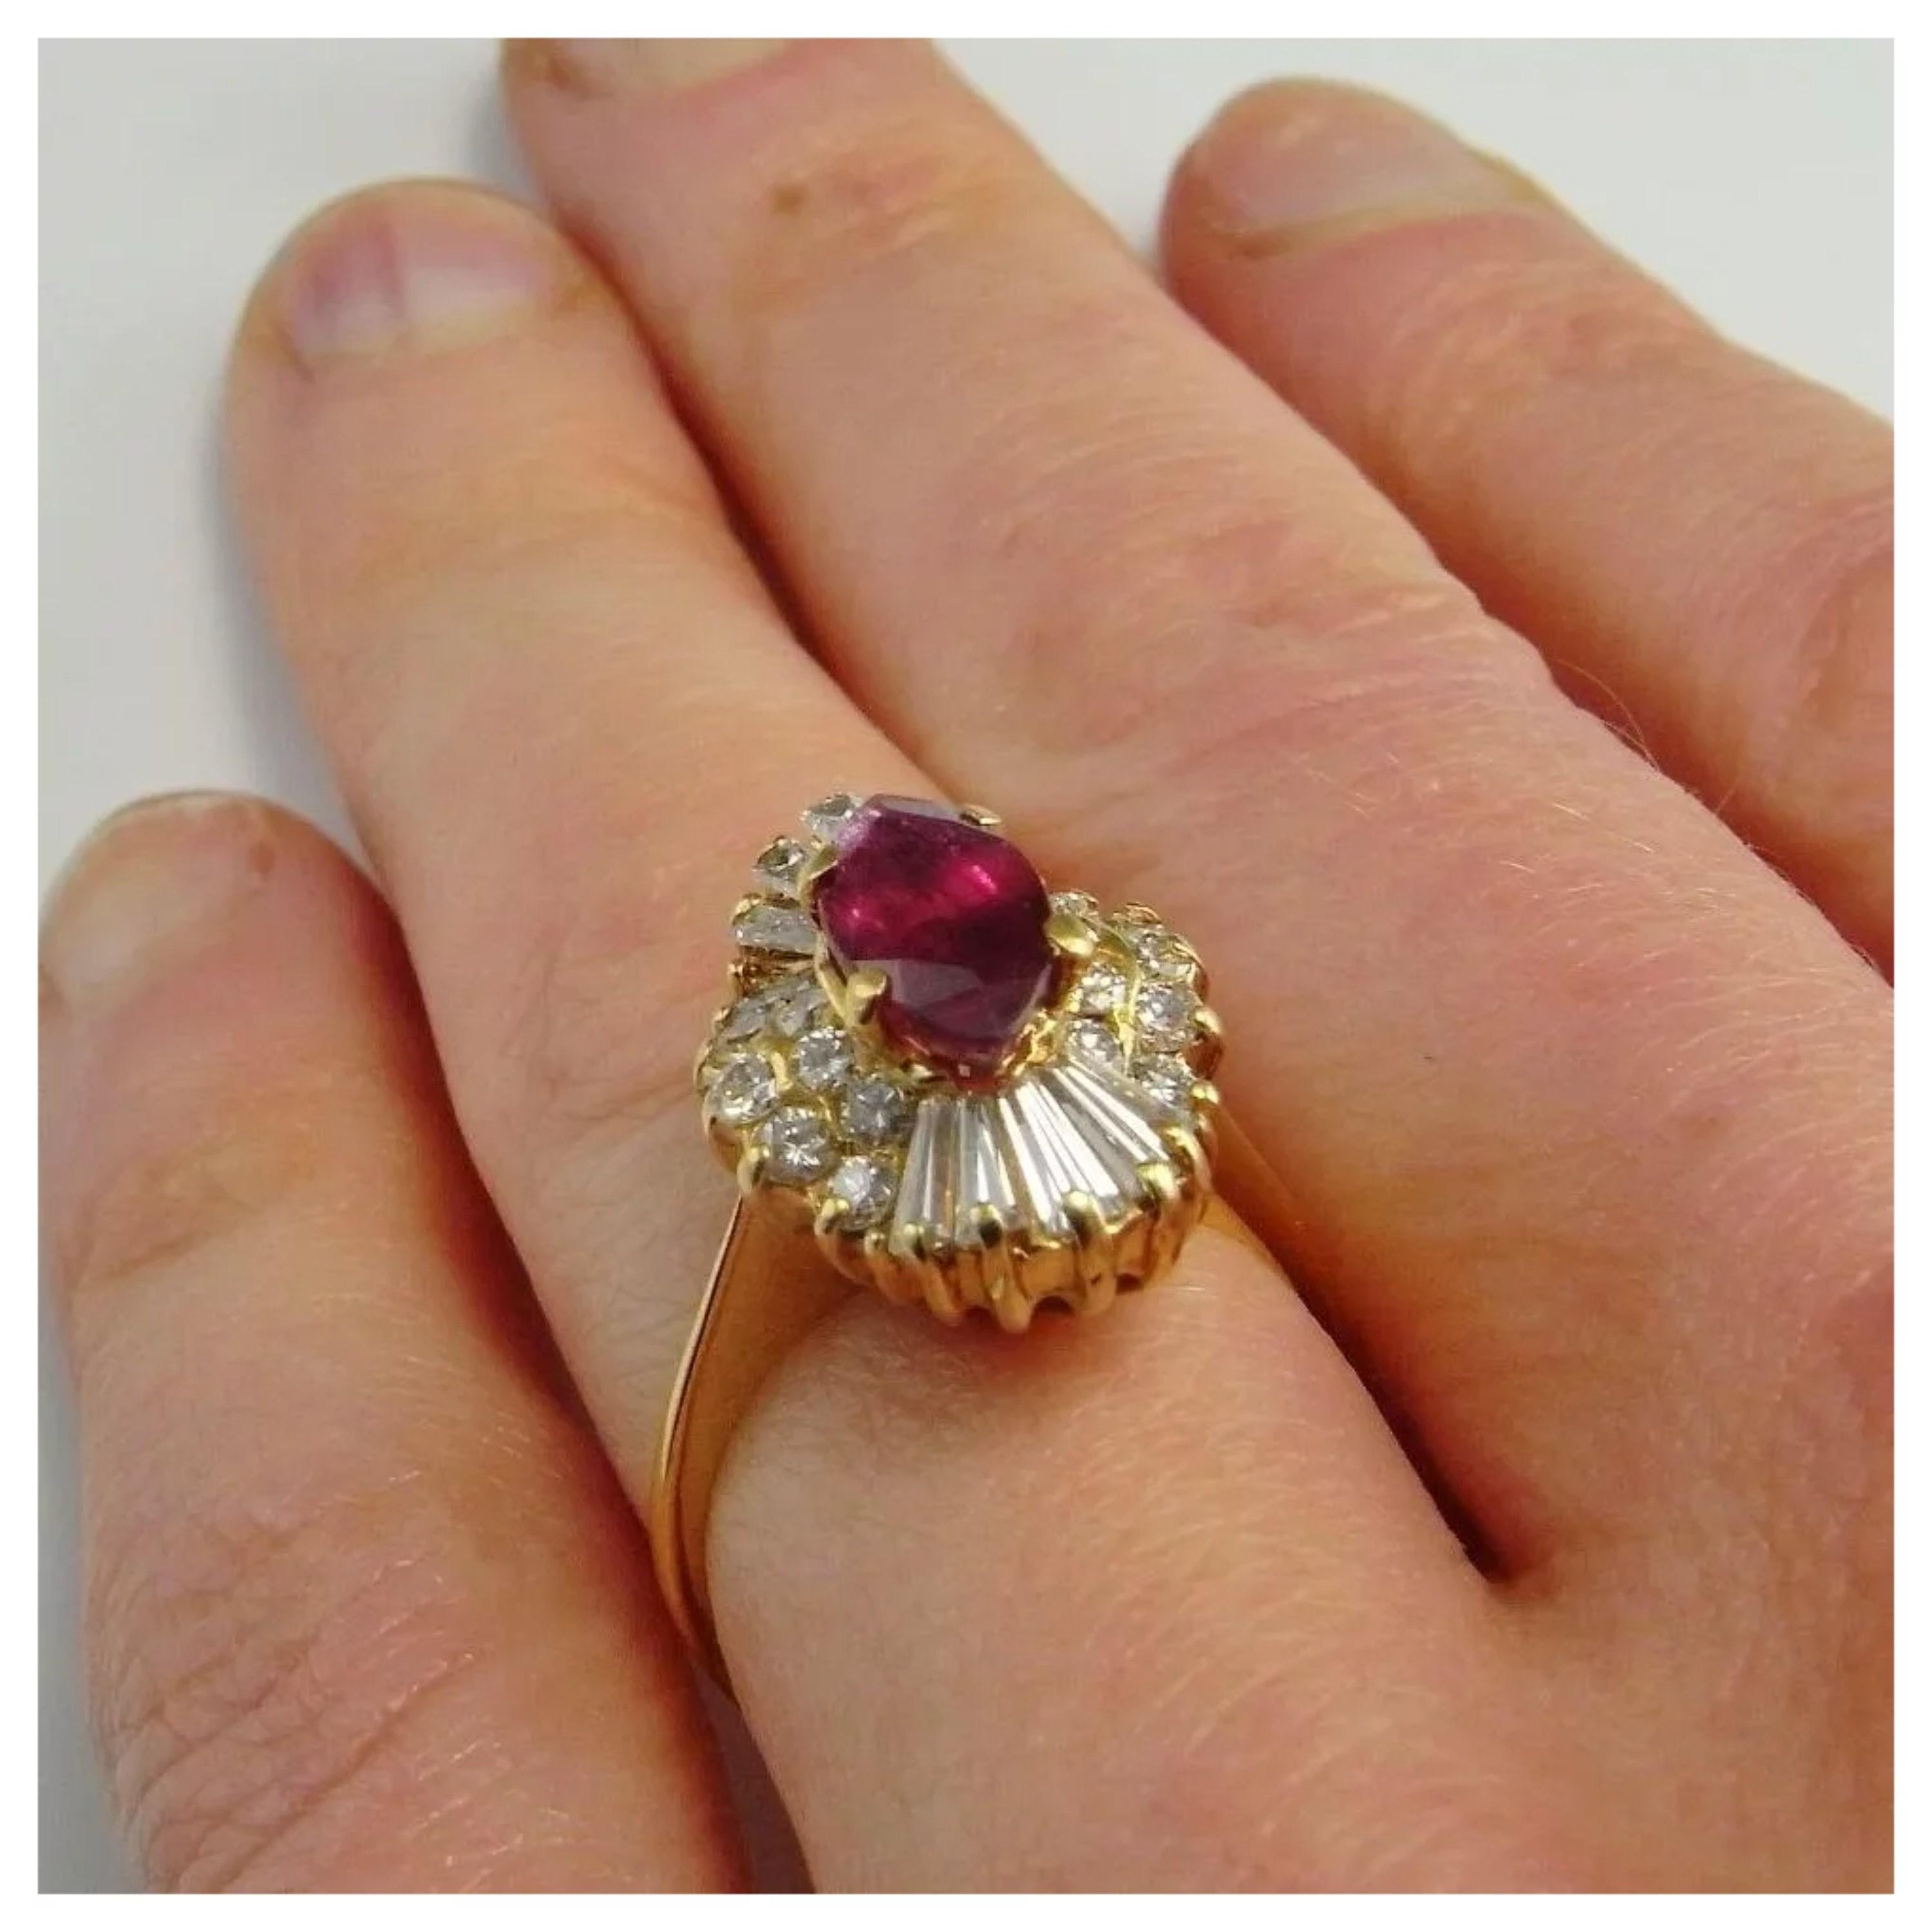 For Sale:  2 Carat Marquise Cut Ruby Diamond Engagement Ring, Ruby Diamond Wedding Ring 3